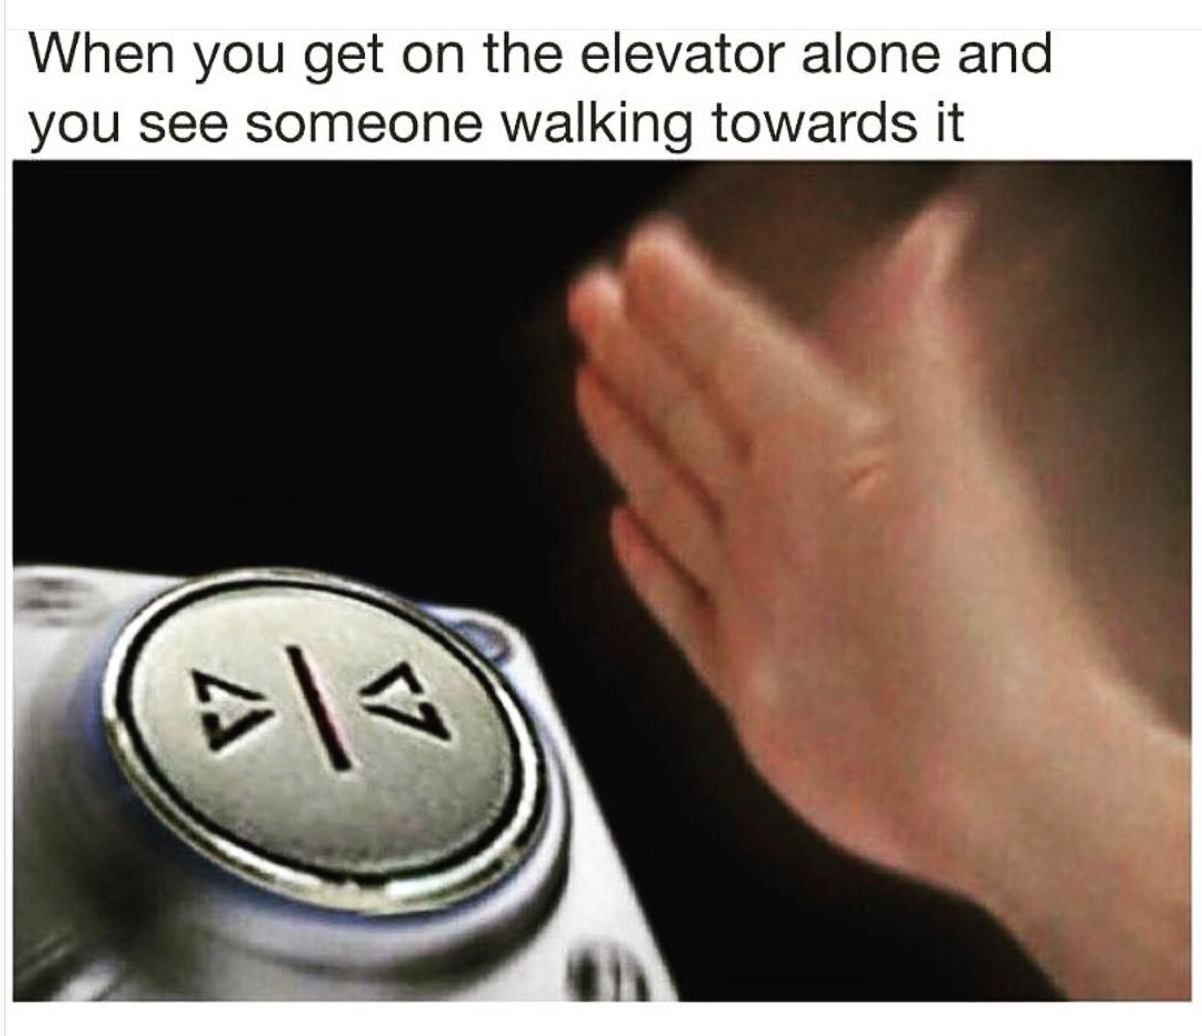 random memes - When you get on the elevator alone and you see someone walking towards it